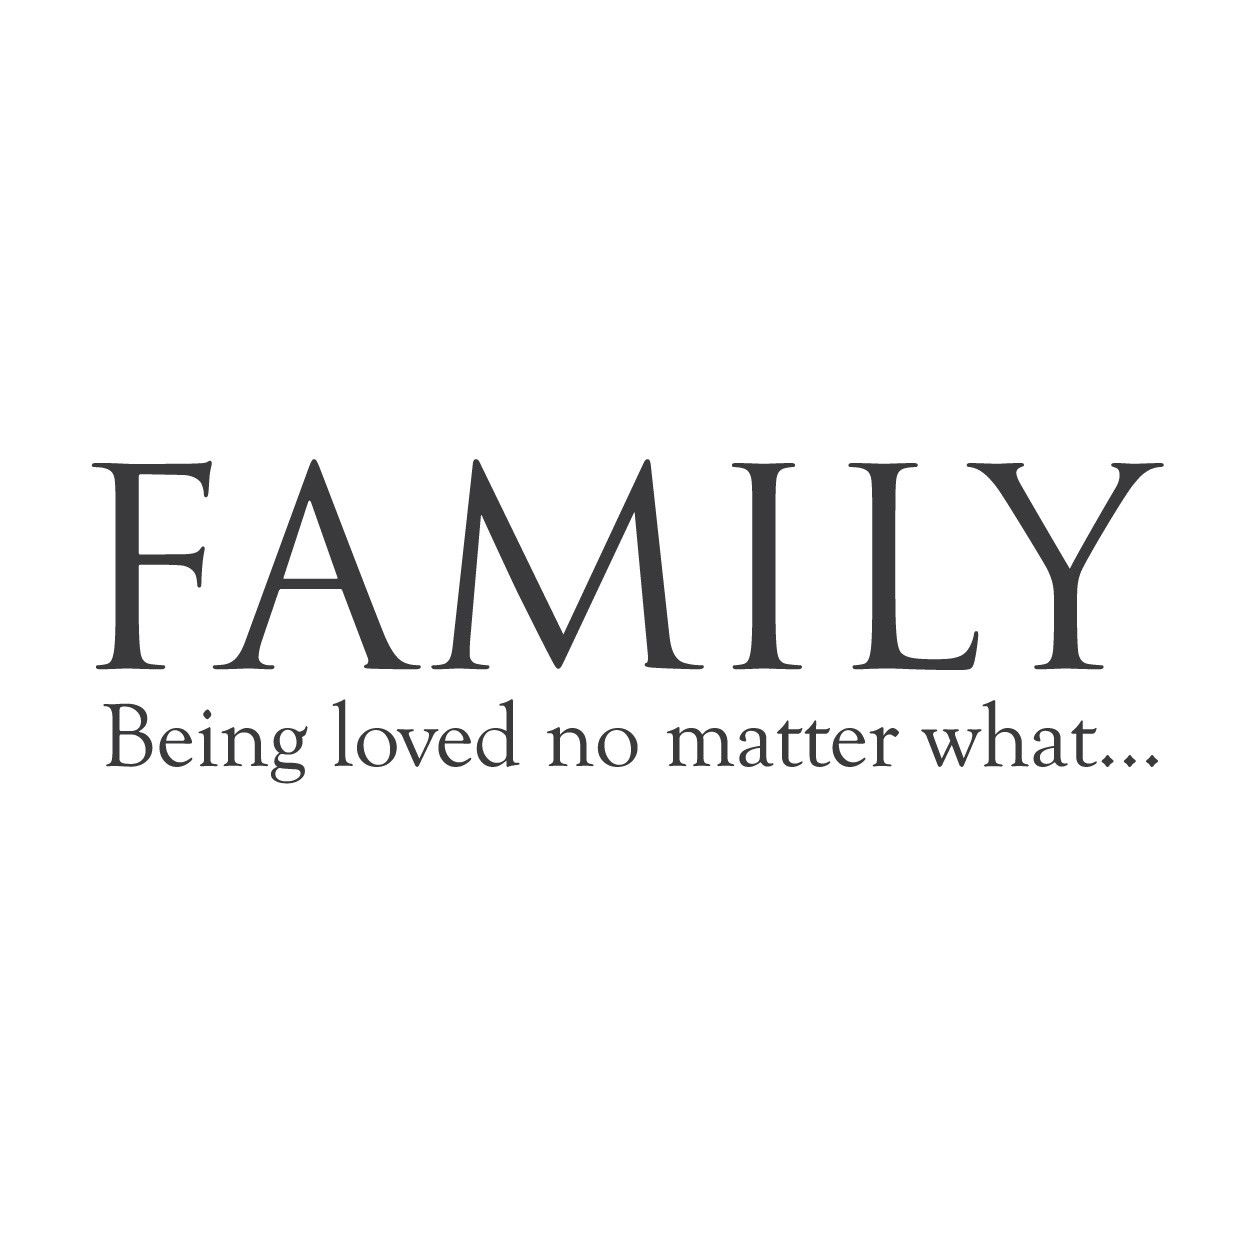 We Are Family Background. Emoji We Heart It Wallpaper, WWE iPod Wallpaper and Daisy Lowe Wallpaper